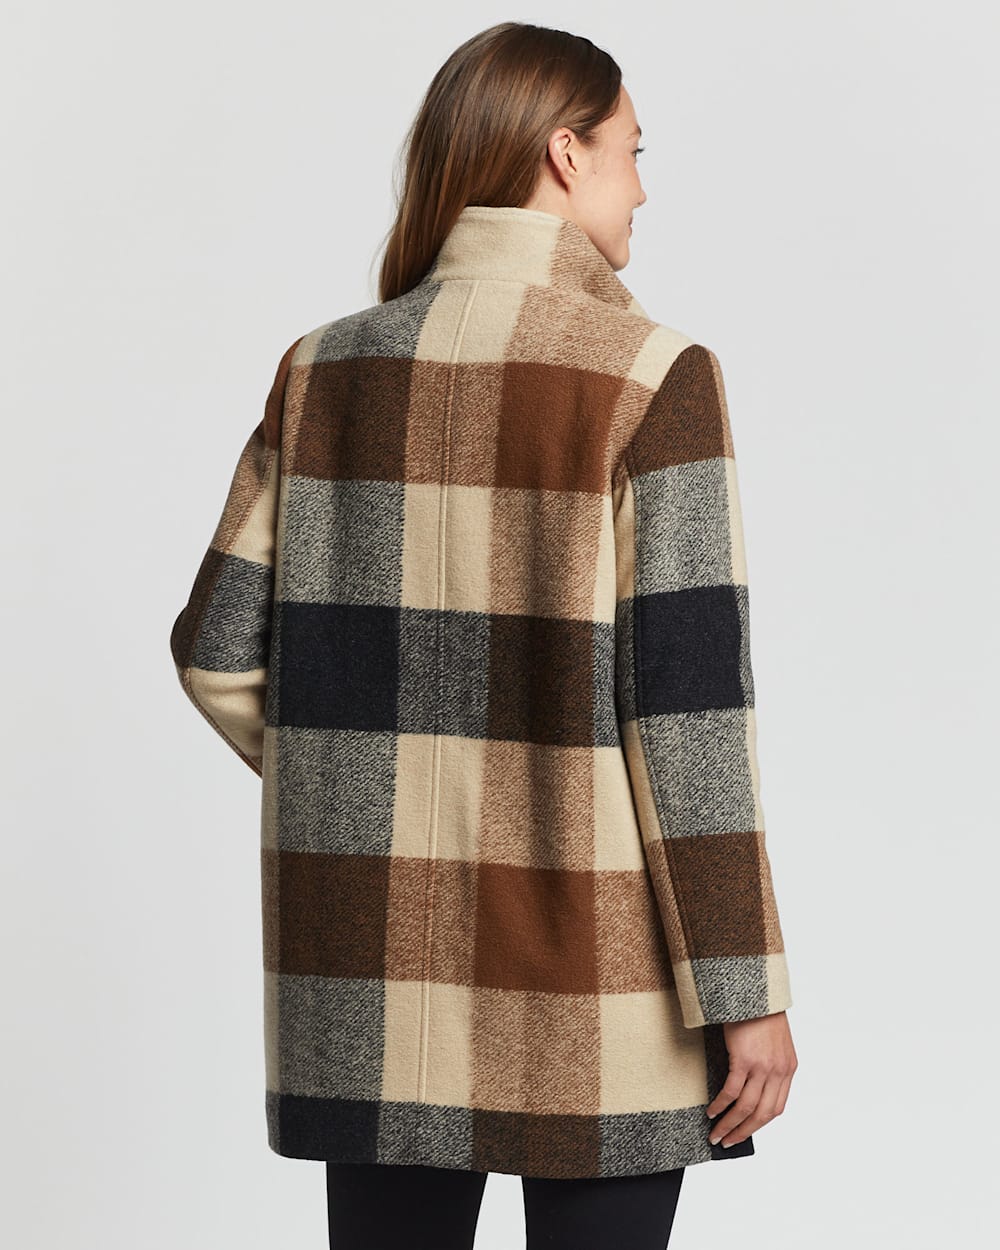 ALTERNATE VIEW OF WOMEN'S CAMDEN TOPPER COAT IN CAMEL/CHARCOAL PLAID image number 2